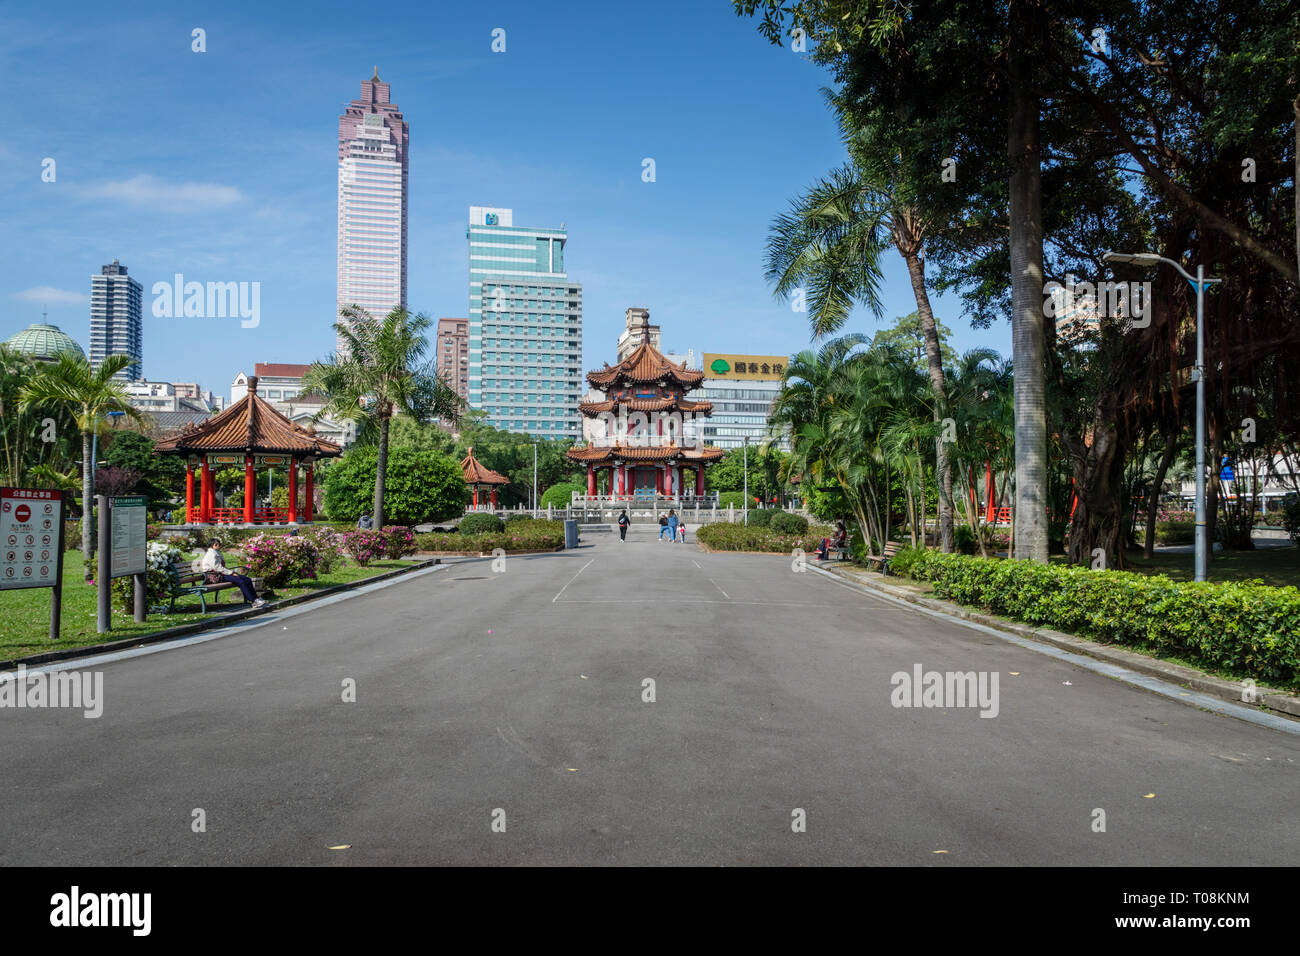 Taipei, Taiwan - March 2019: 228 Memorial Park city view with Chinese pagoda. 228 Memorial Park is located in the central area of Taipei Stock Photo